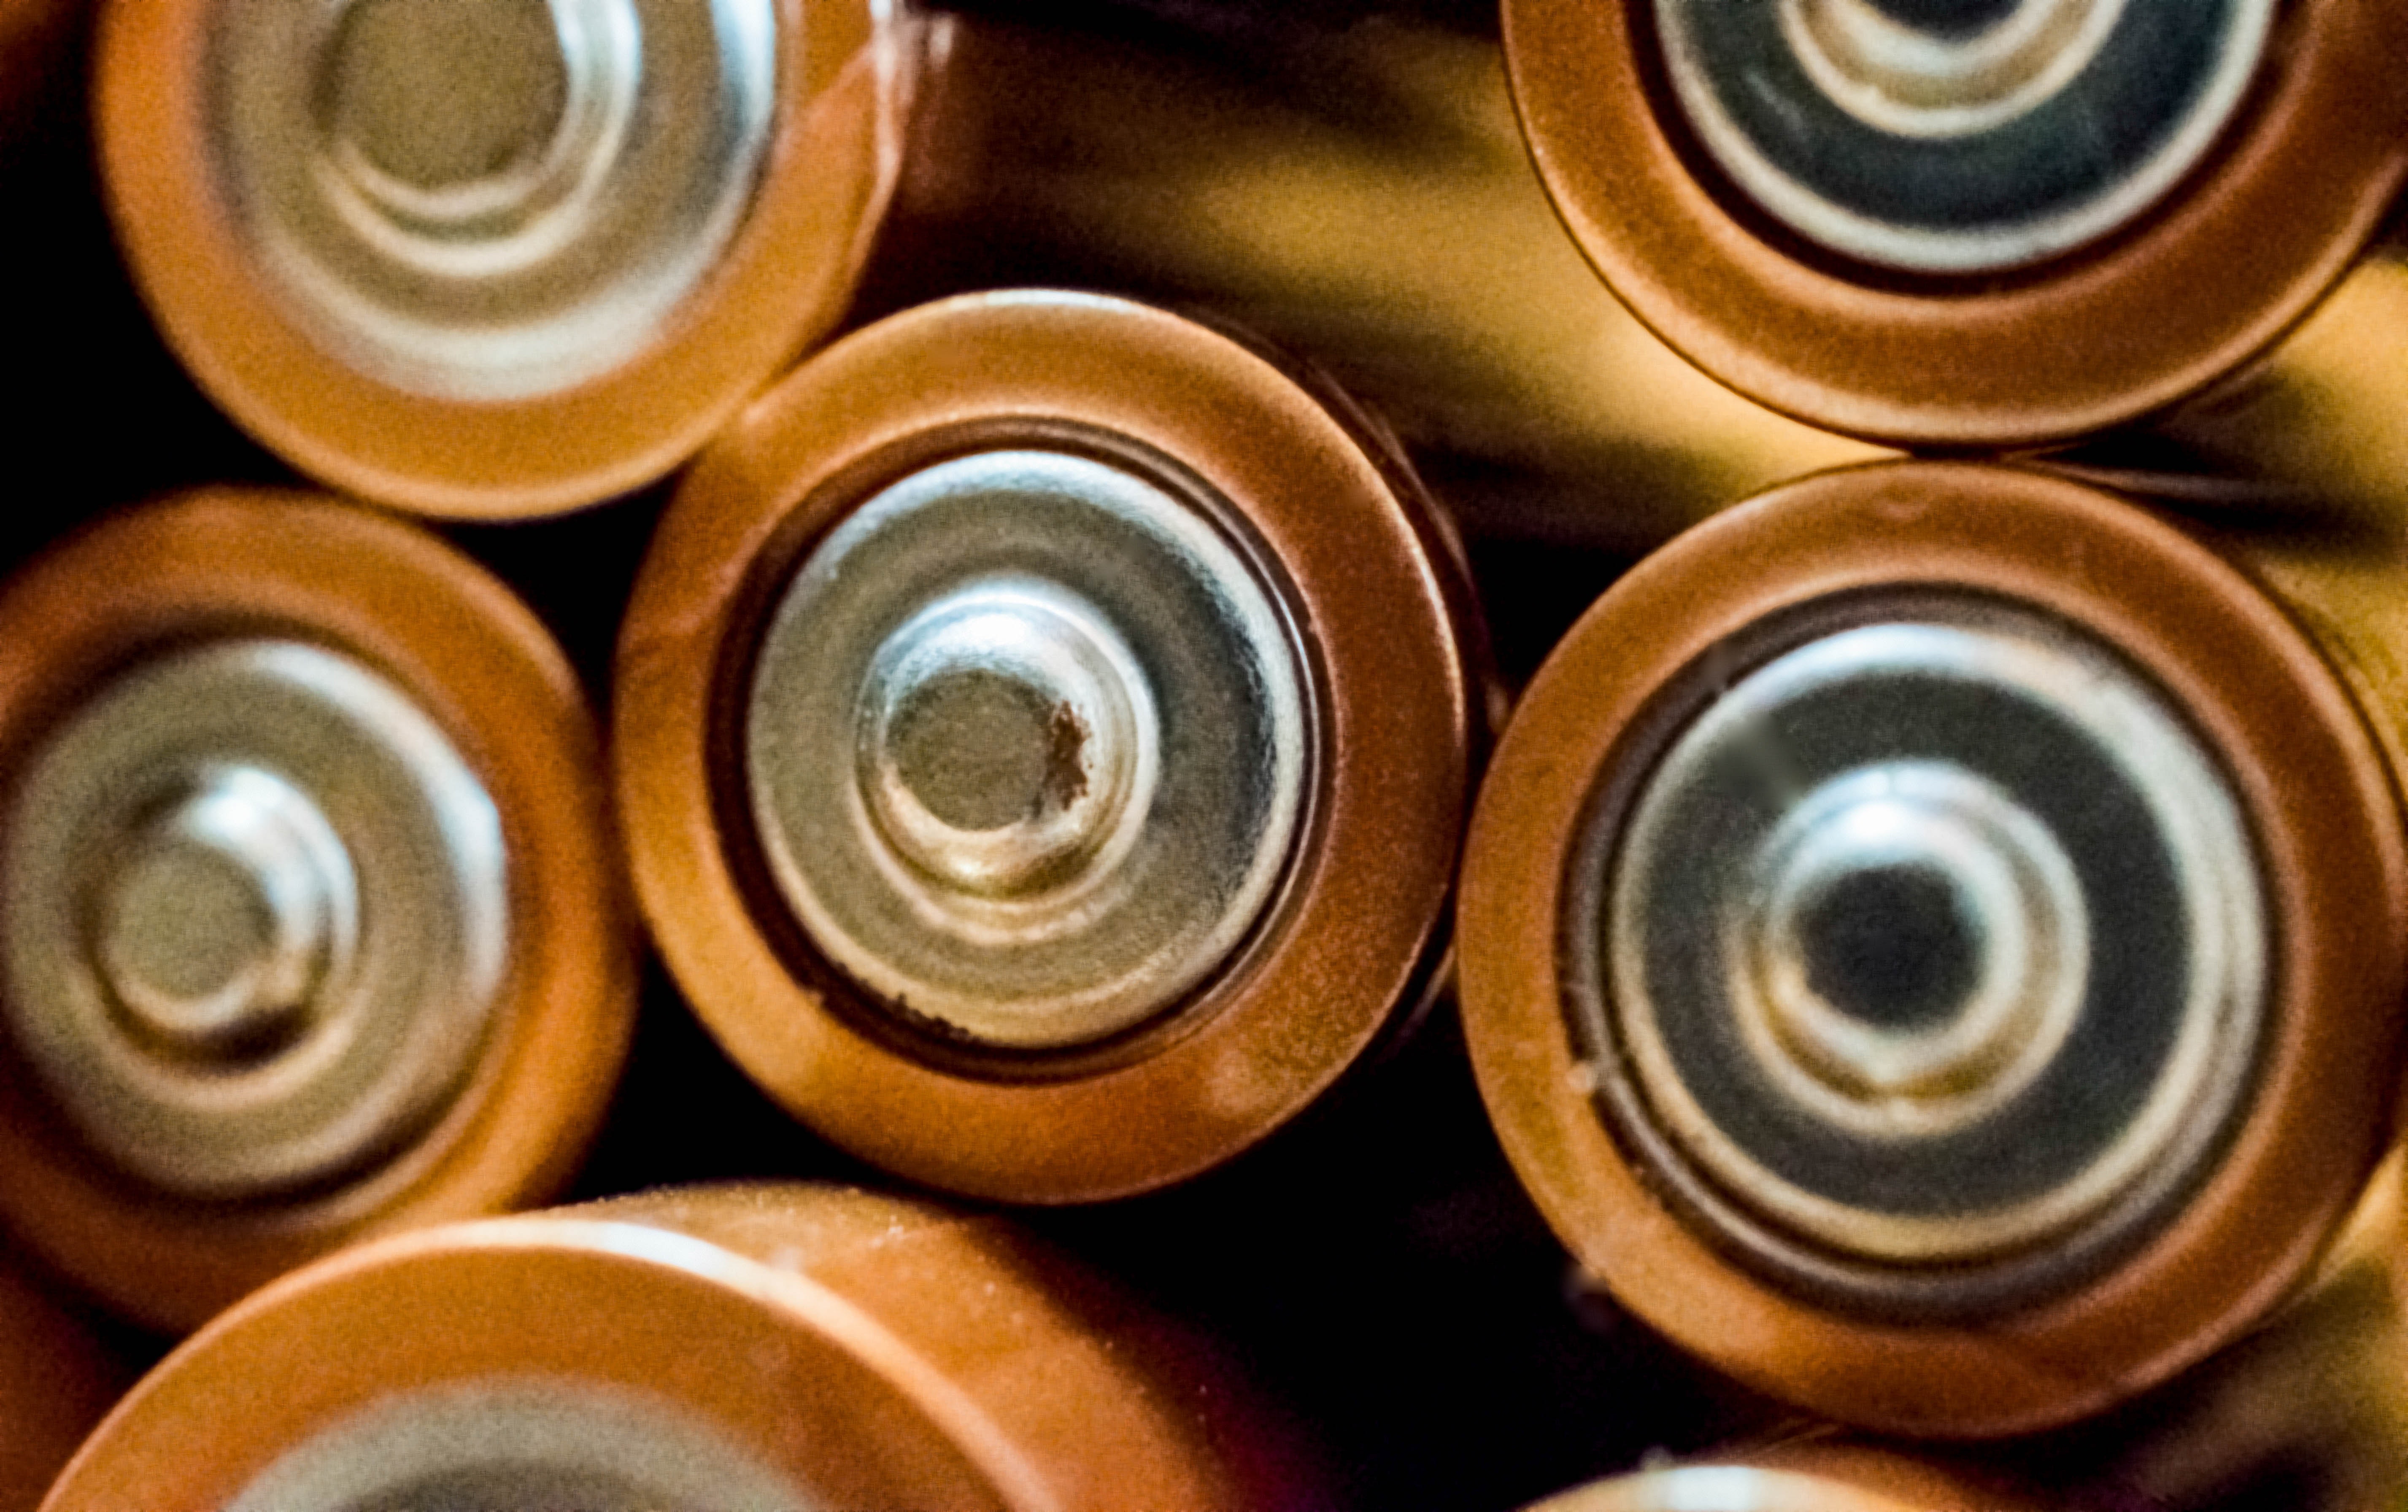 What can we expect from the new EU battery regulations? 